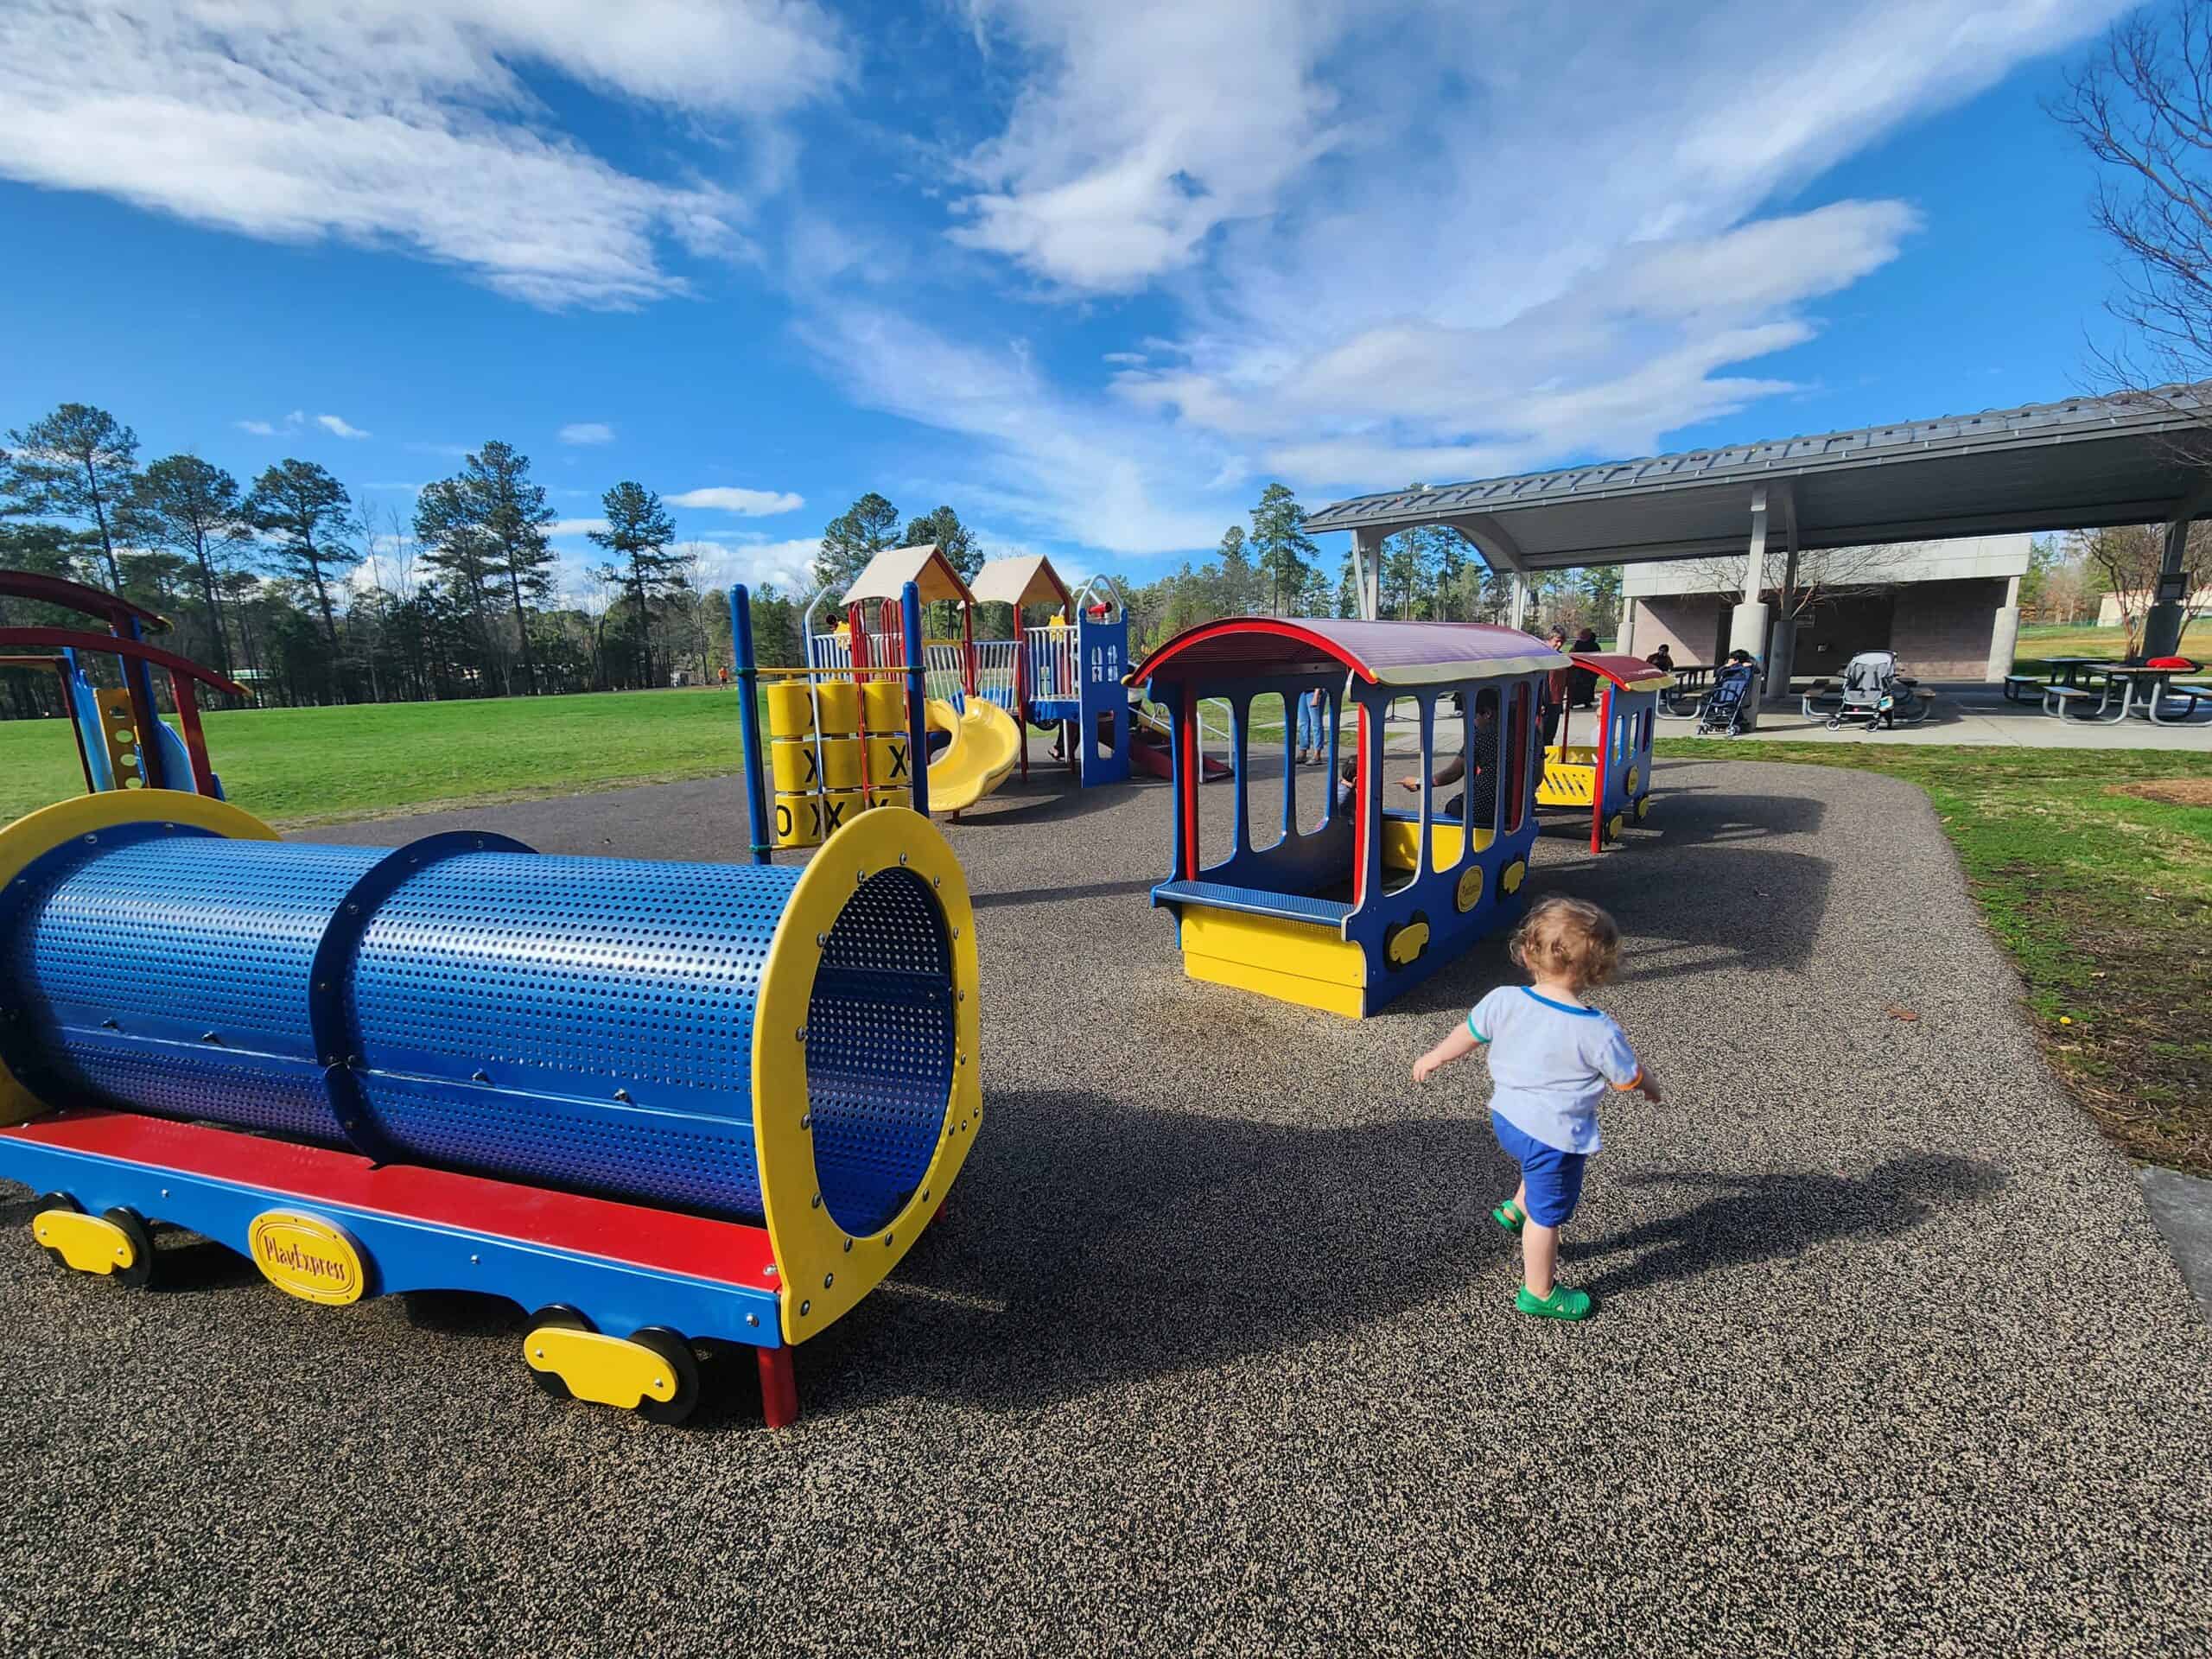 A young child runs towards colorful playground equipment on a sunny day, with bright blue tunnels and a train-themed play structure inviting active outdoor play in a community park.